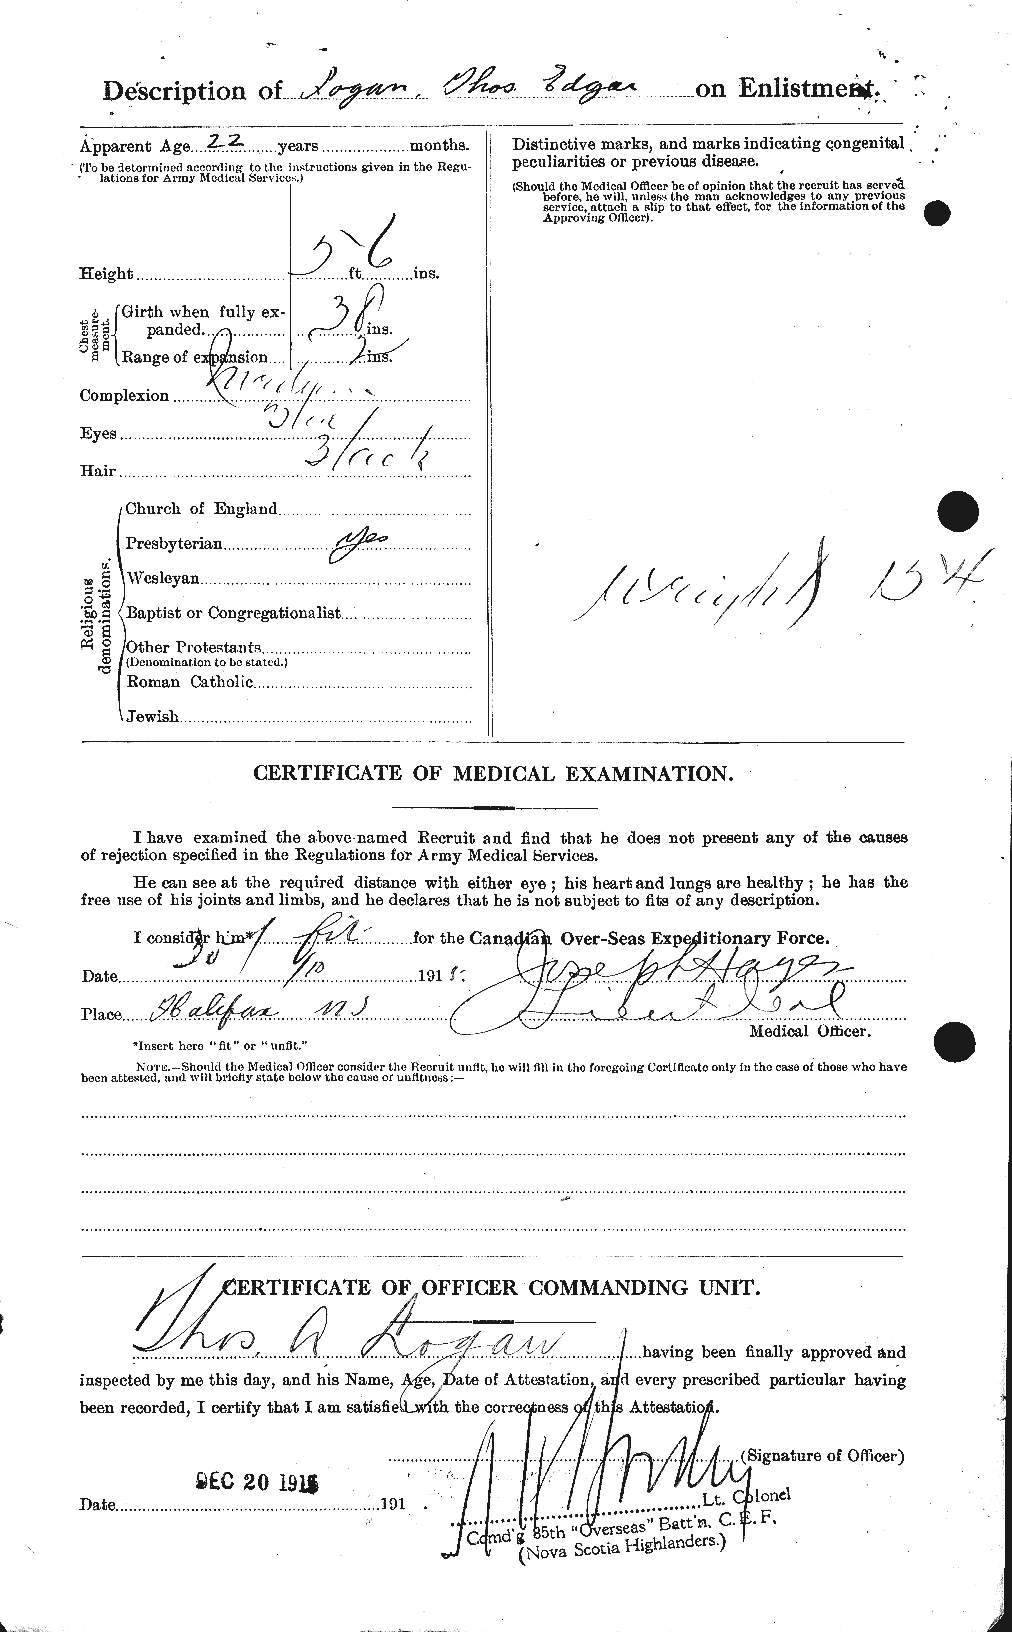 Personnel Records of the First World War - CEF 461821b